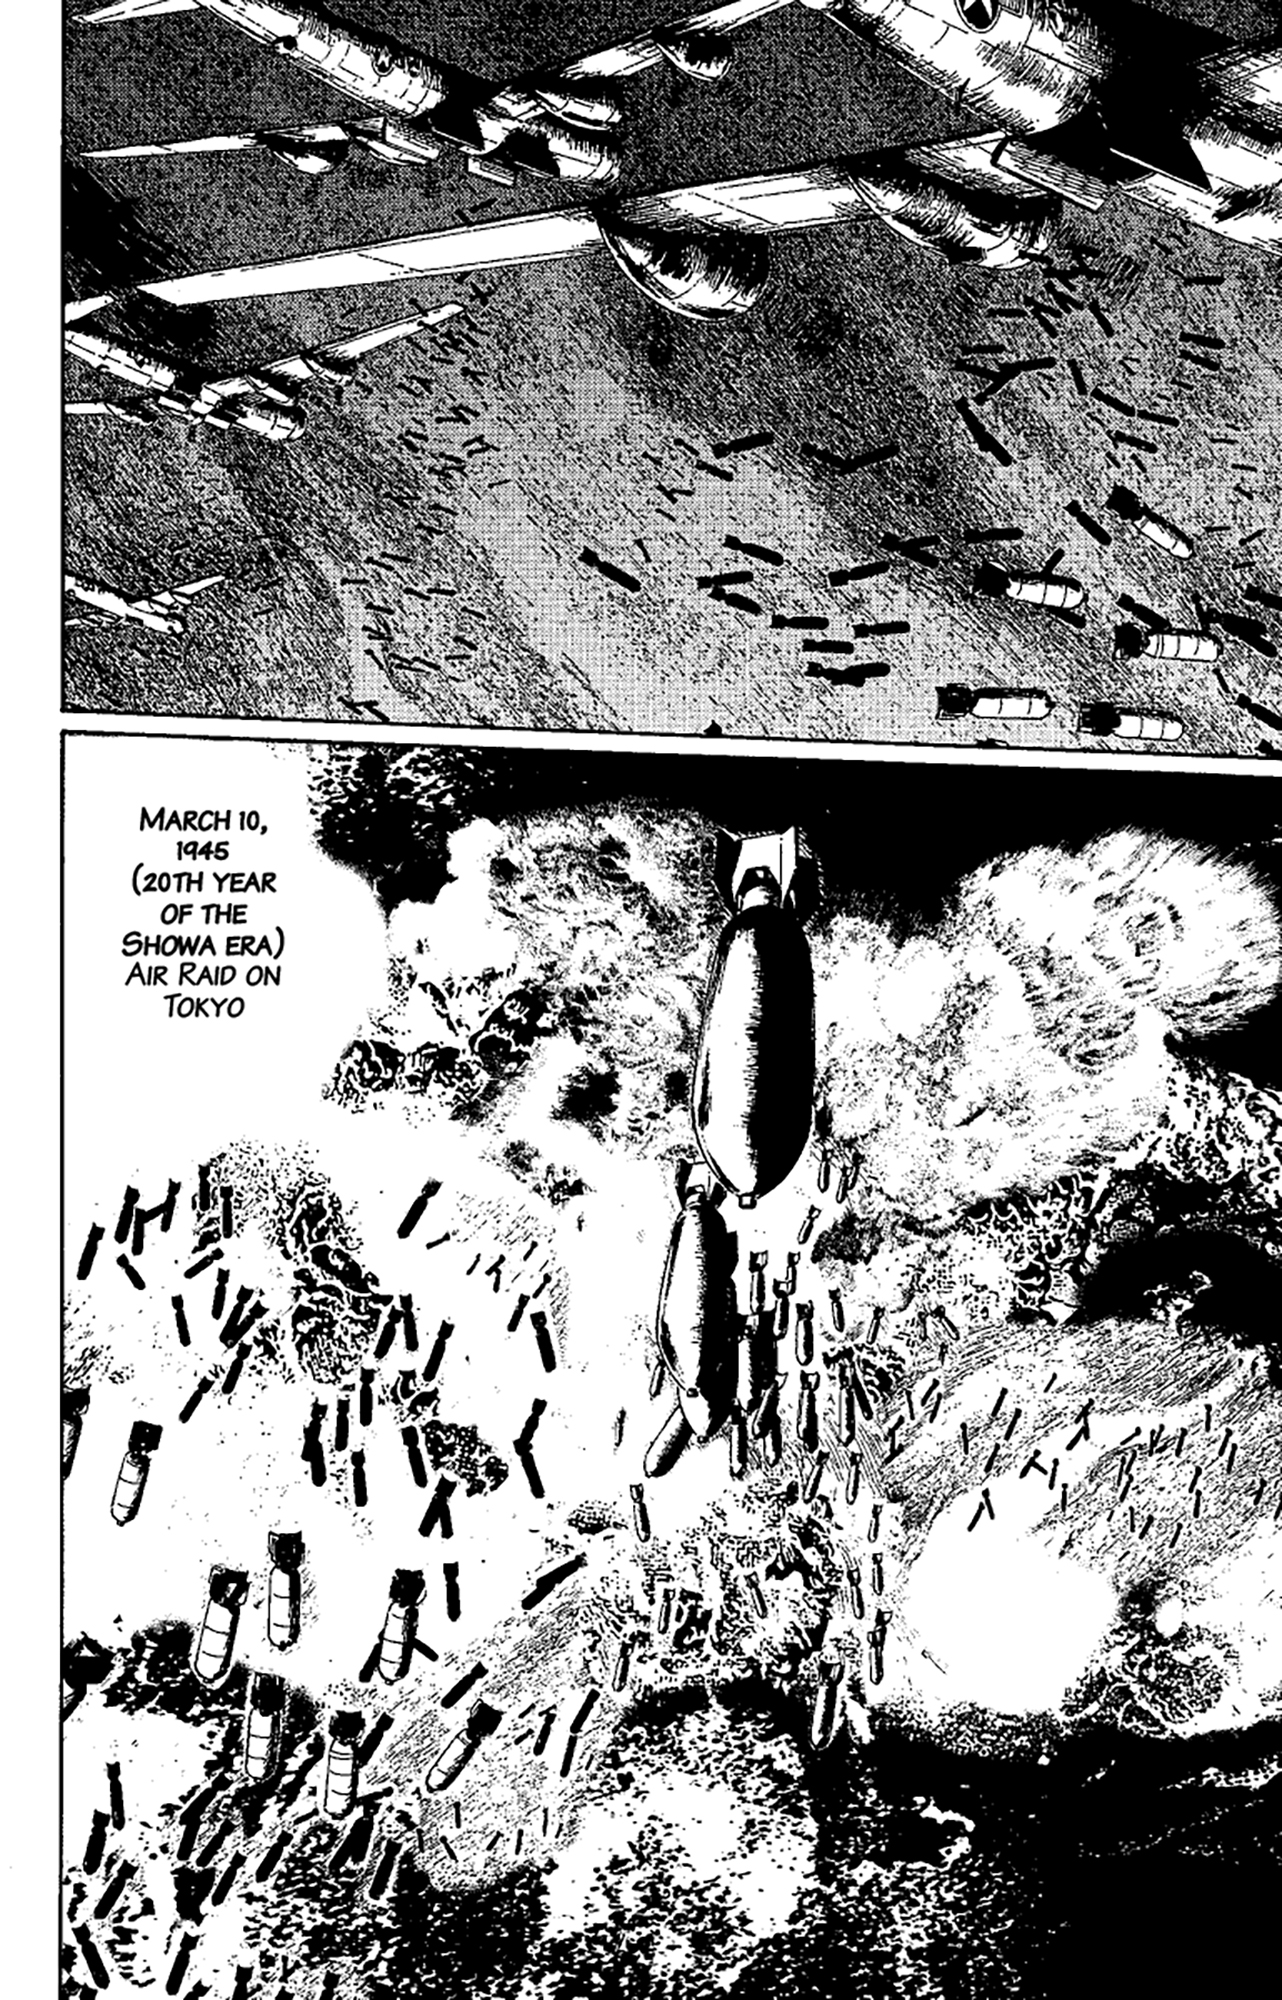 Japan's Longest Day: A Graphic Novel About the End of WWII